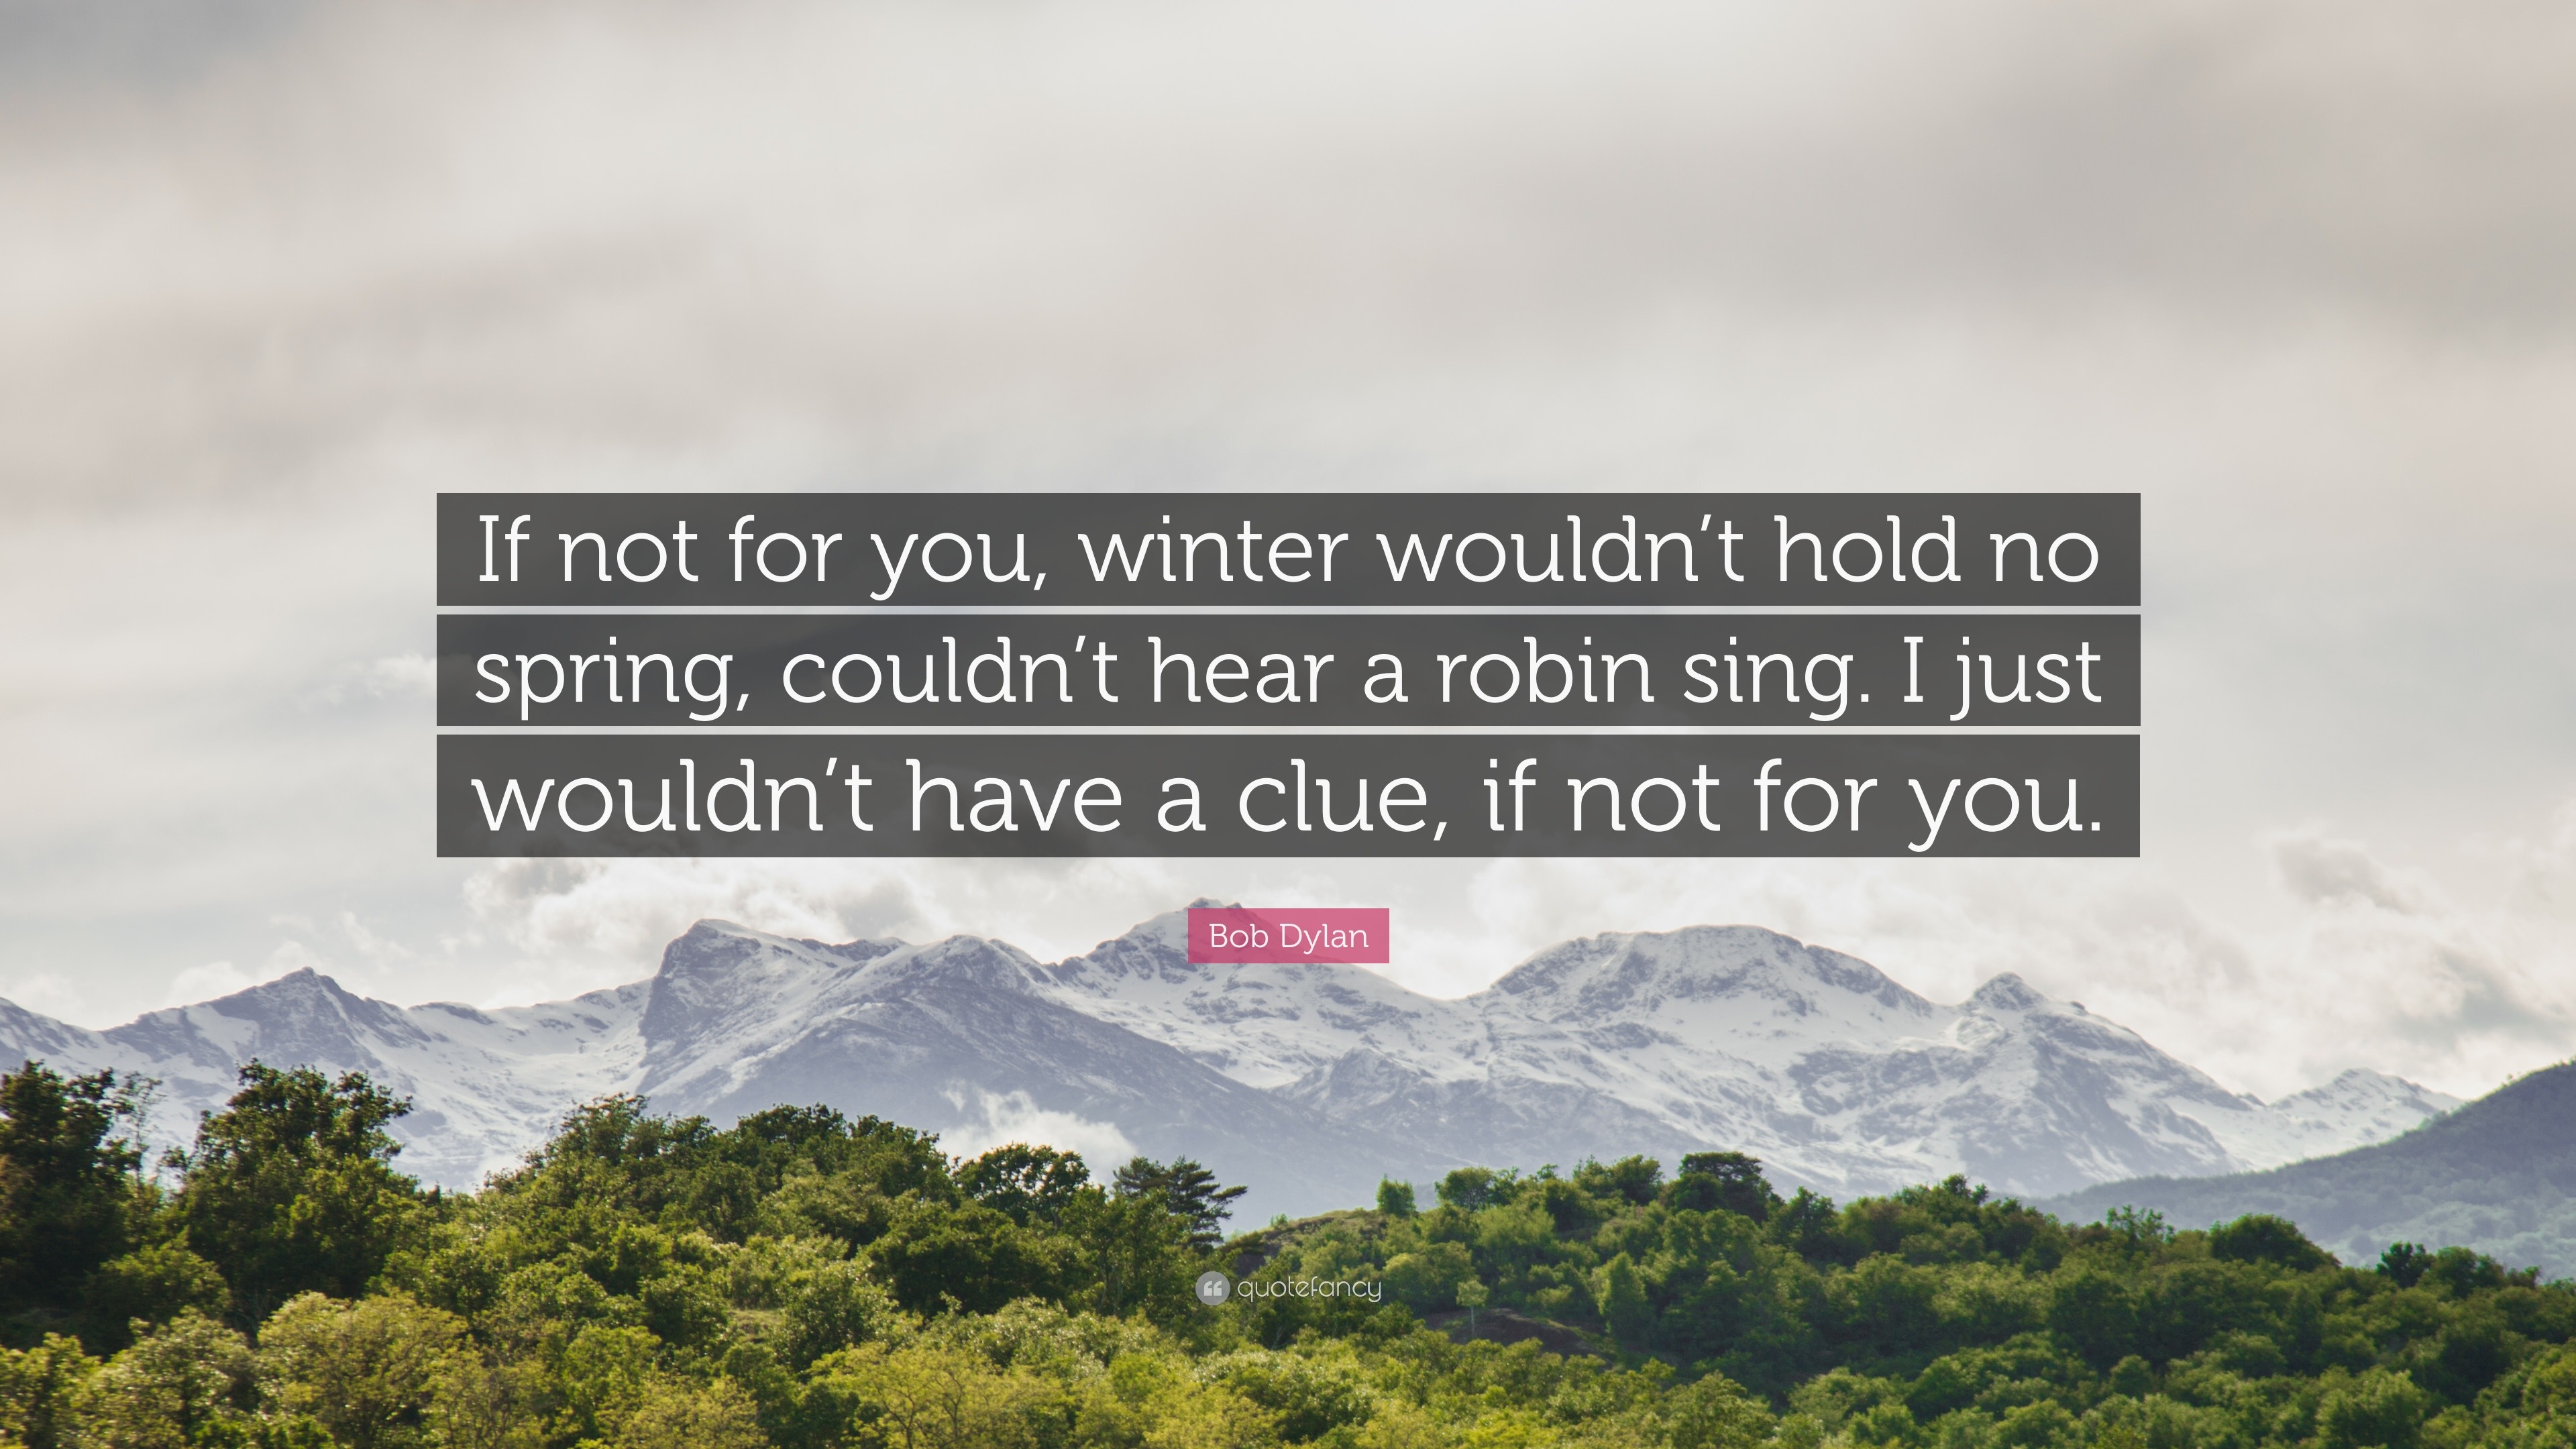 https://quotefancy.com/media/wallpaper/3840x2160/179717-Bob-Dylan-Quote-If-not-for-you-winter-wouldn-t-hold-no-spring.jpg